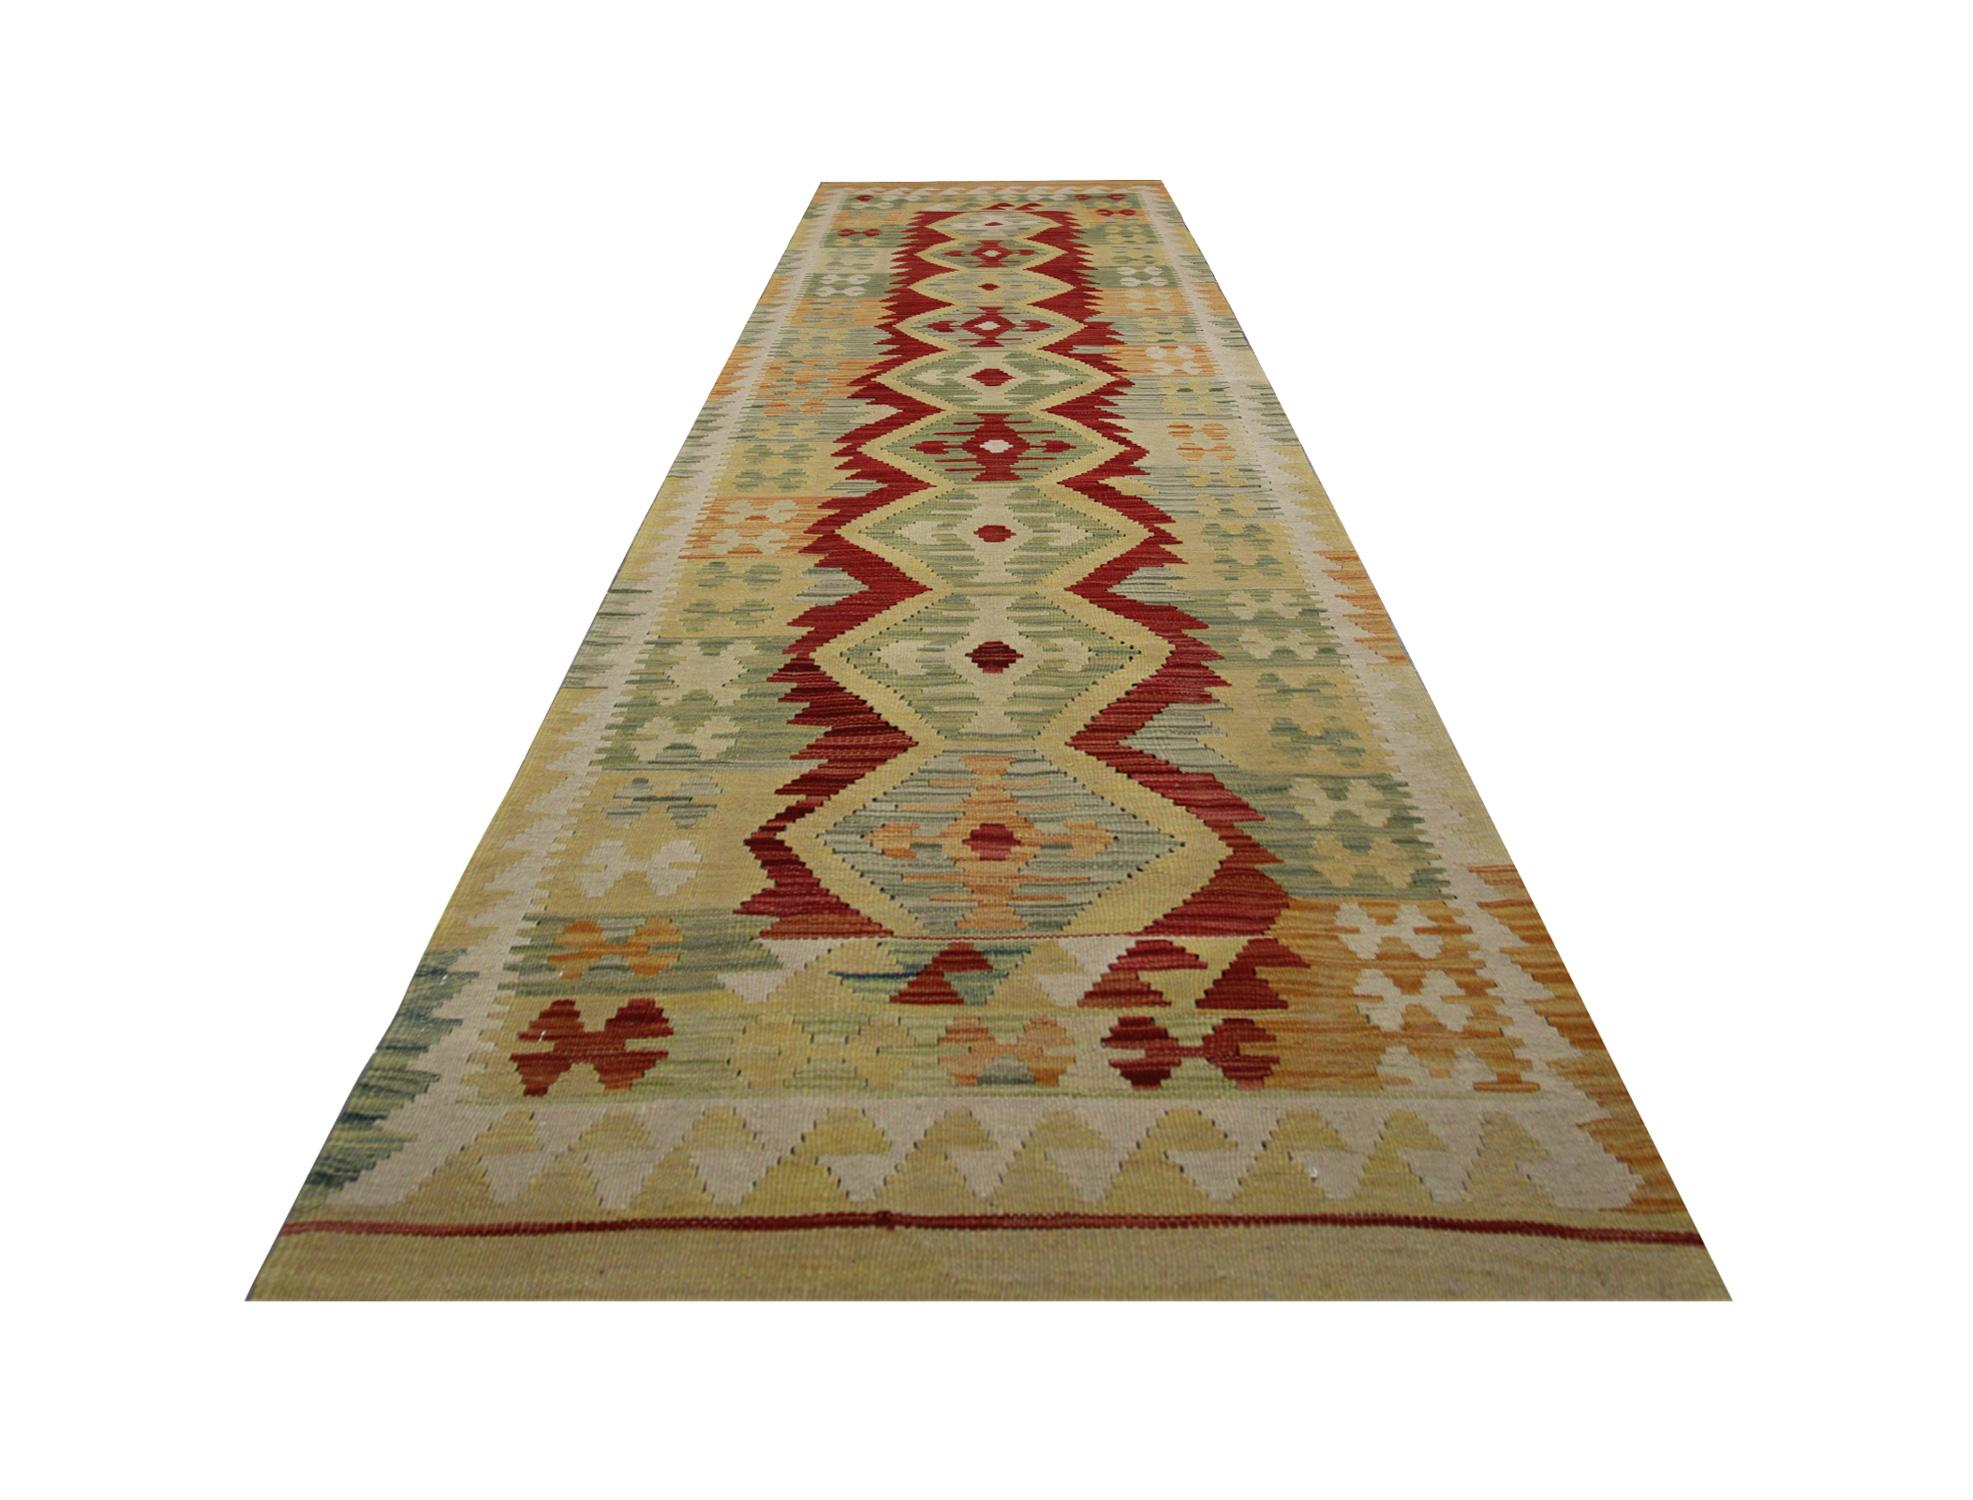 This fine wool kilim rug was woven by hand in Afghanistan in the early 21st century. The design features a bold geometric pattern woven in a repeating structure, displaying a rich colour palette including cream, red, green and beige. The colour and